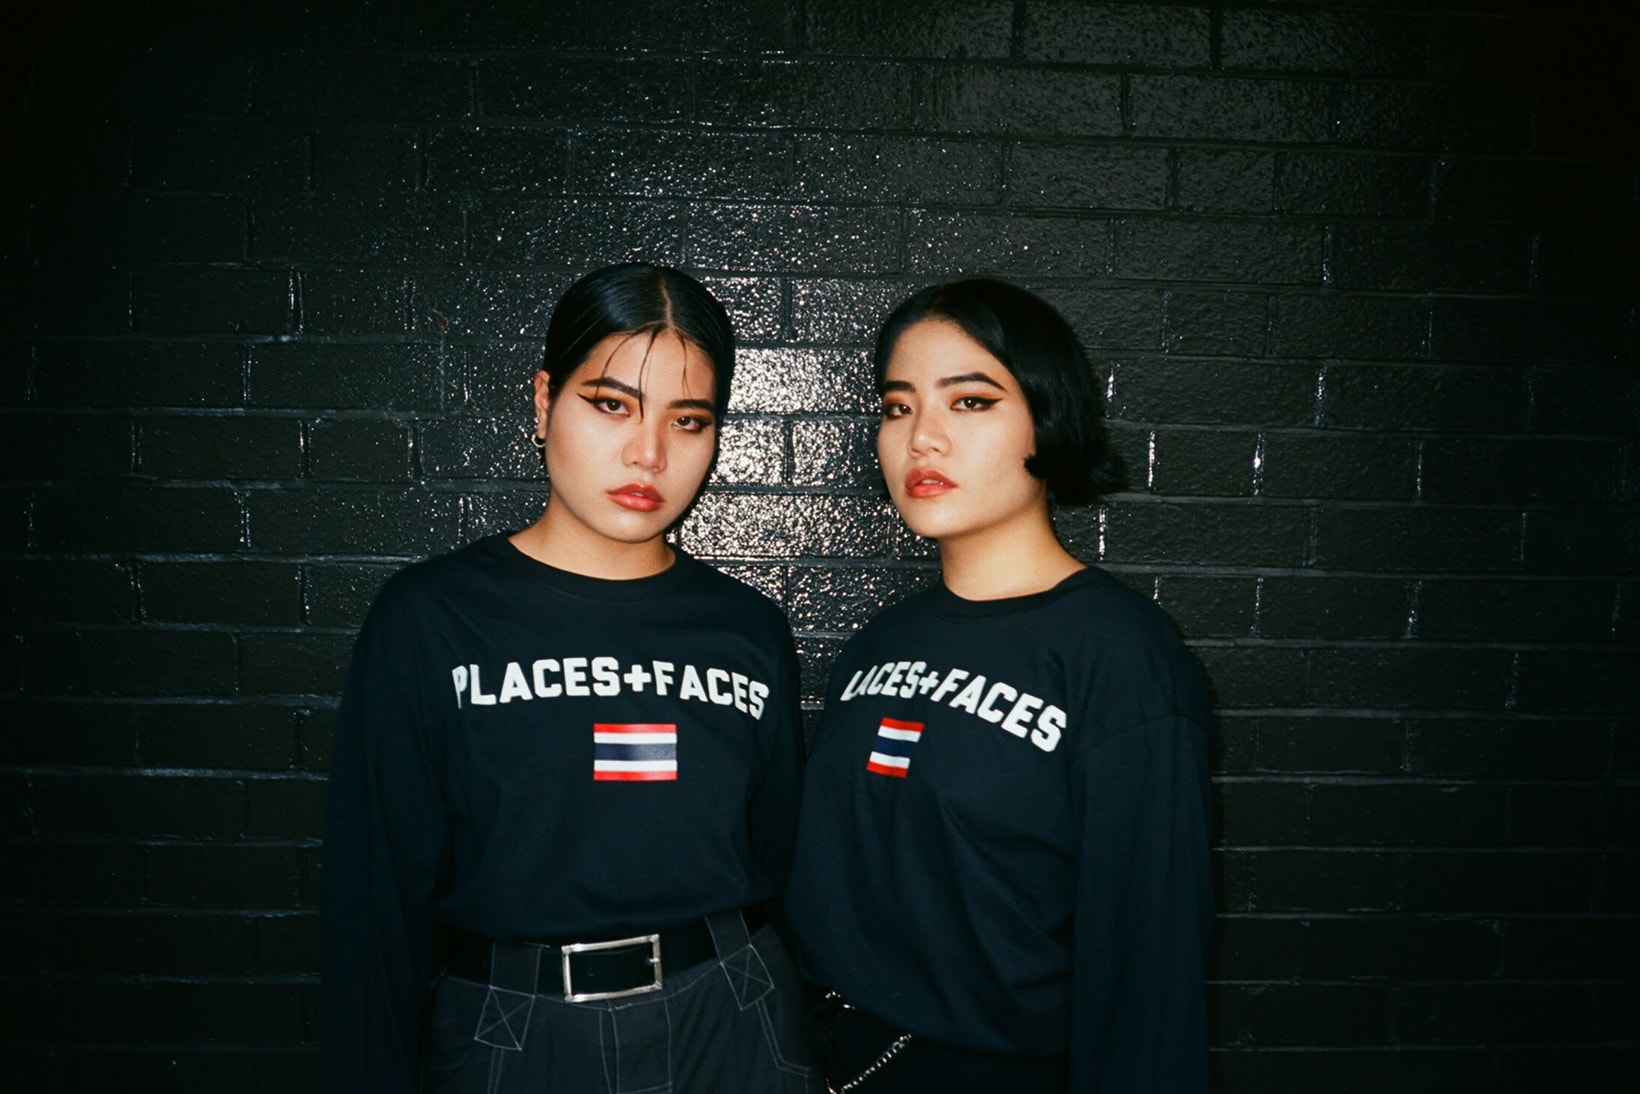 Places+Faces Bangkok Party Capsule Collection